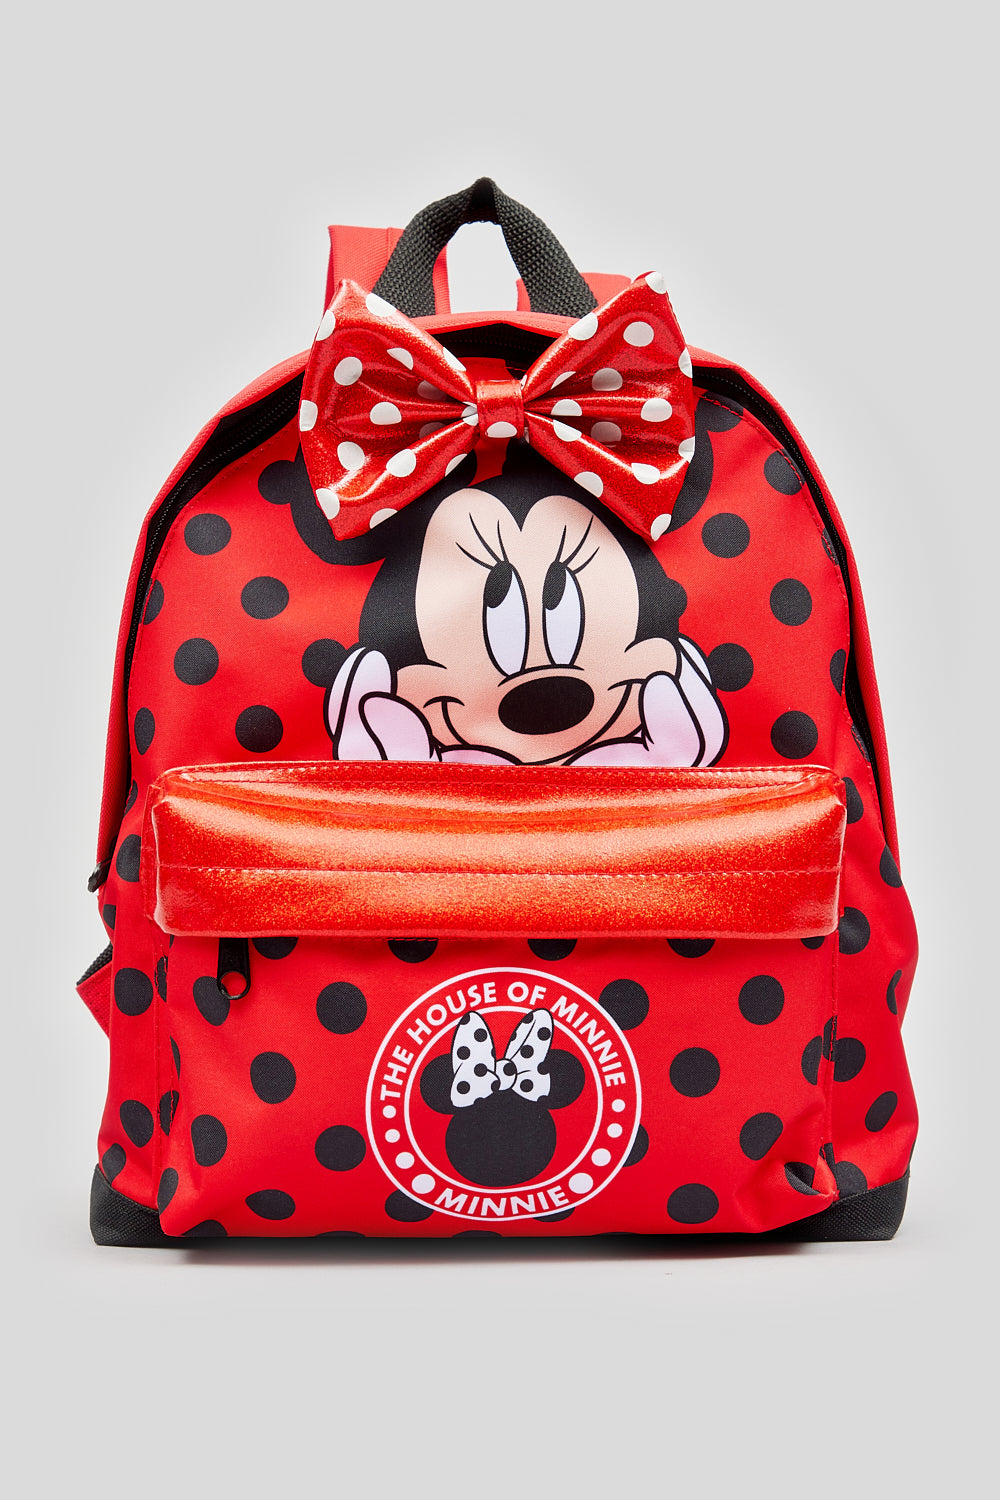 MINNIE MOUSE TRADITIONAL POLKA ROXY BACKPACK